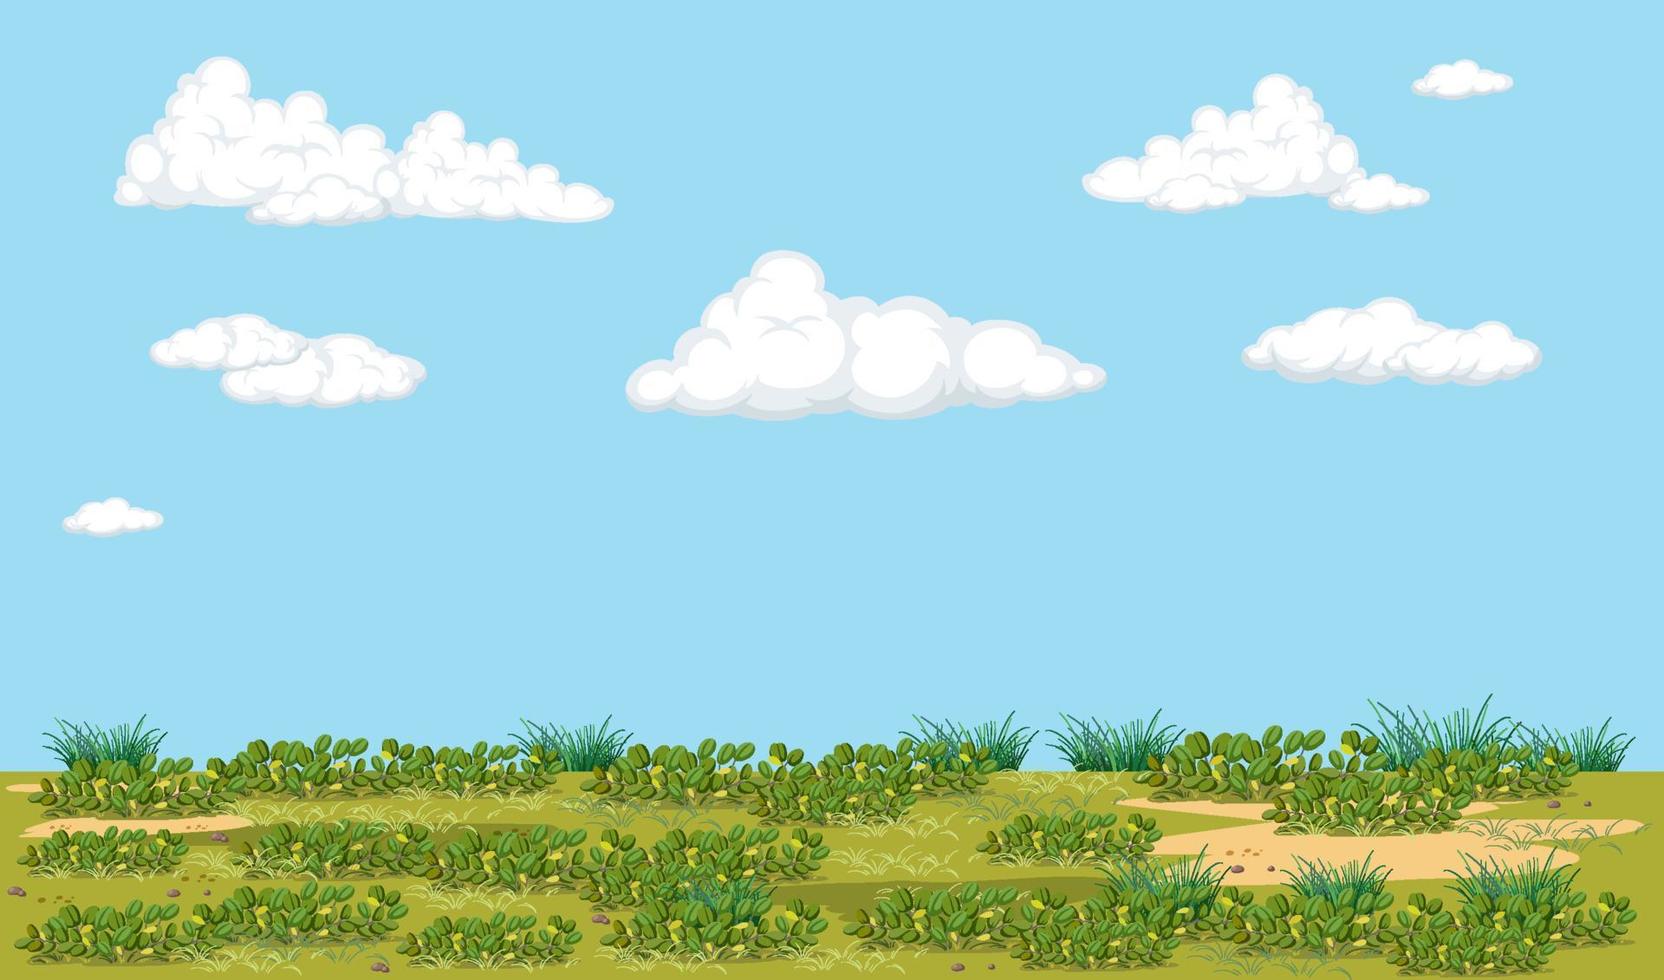 Empty scene with meadow and sky vector